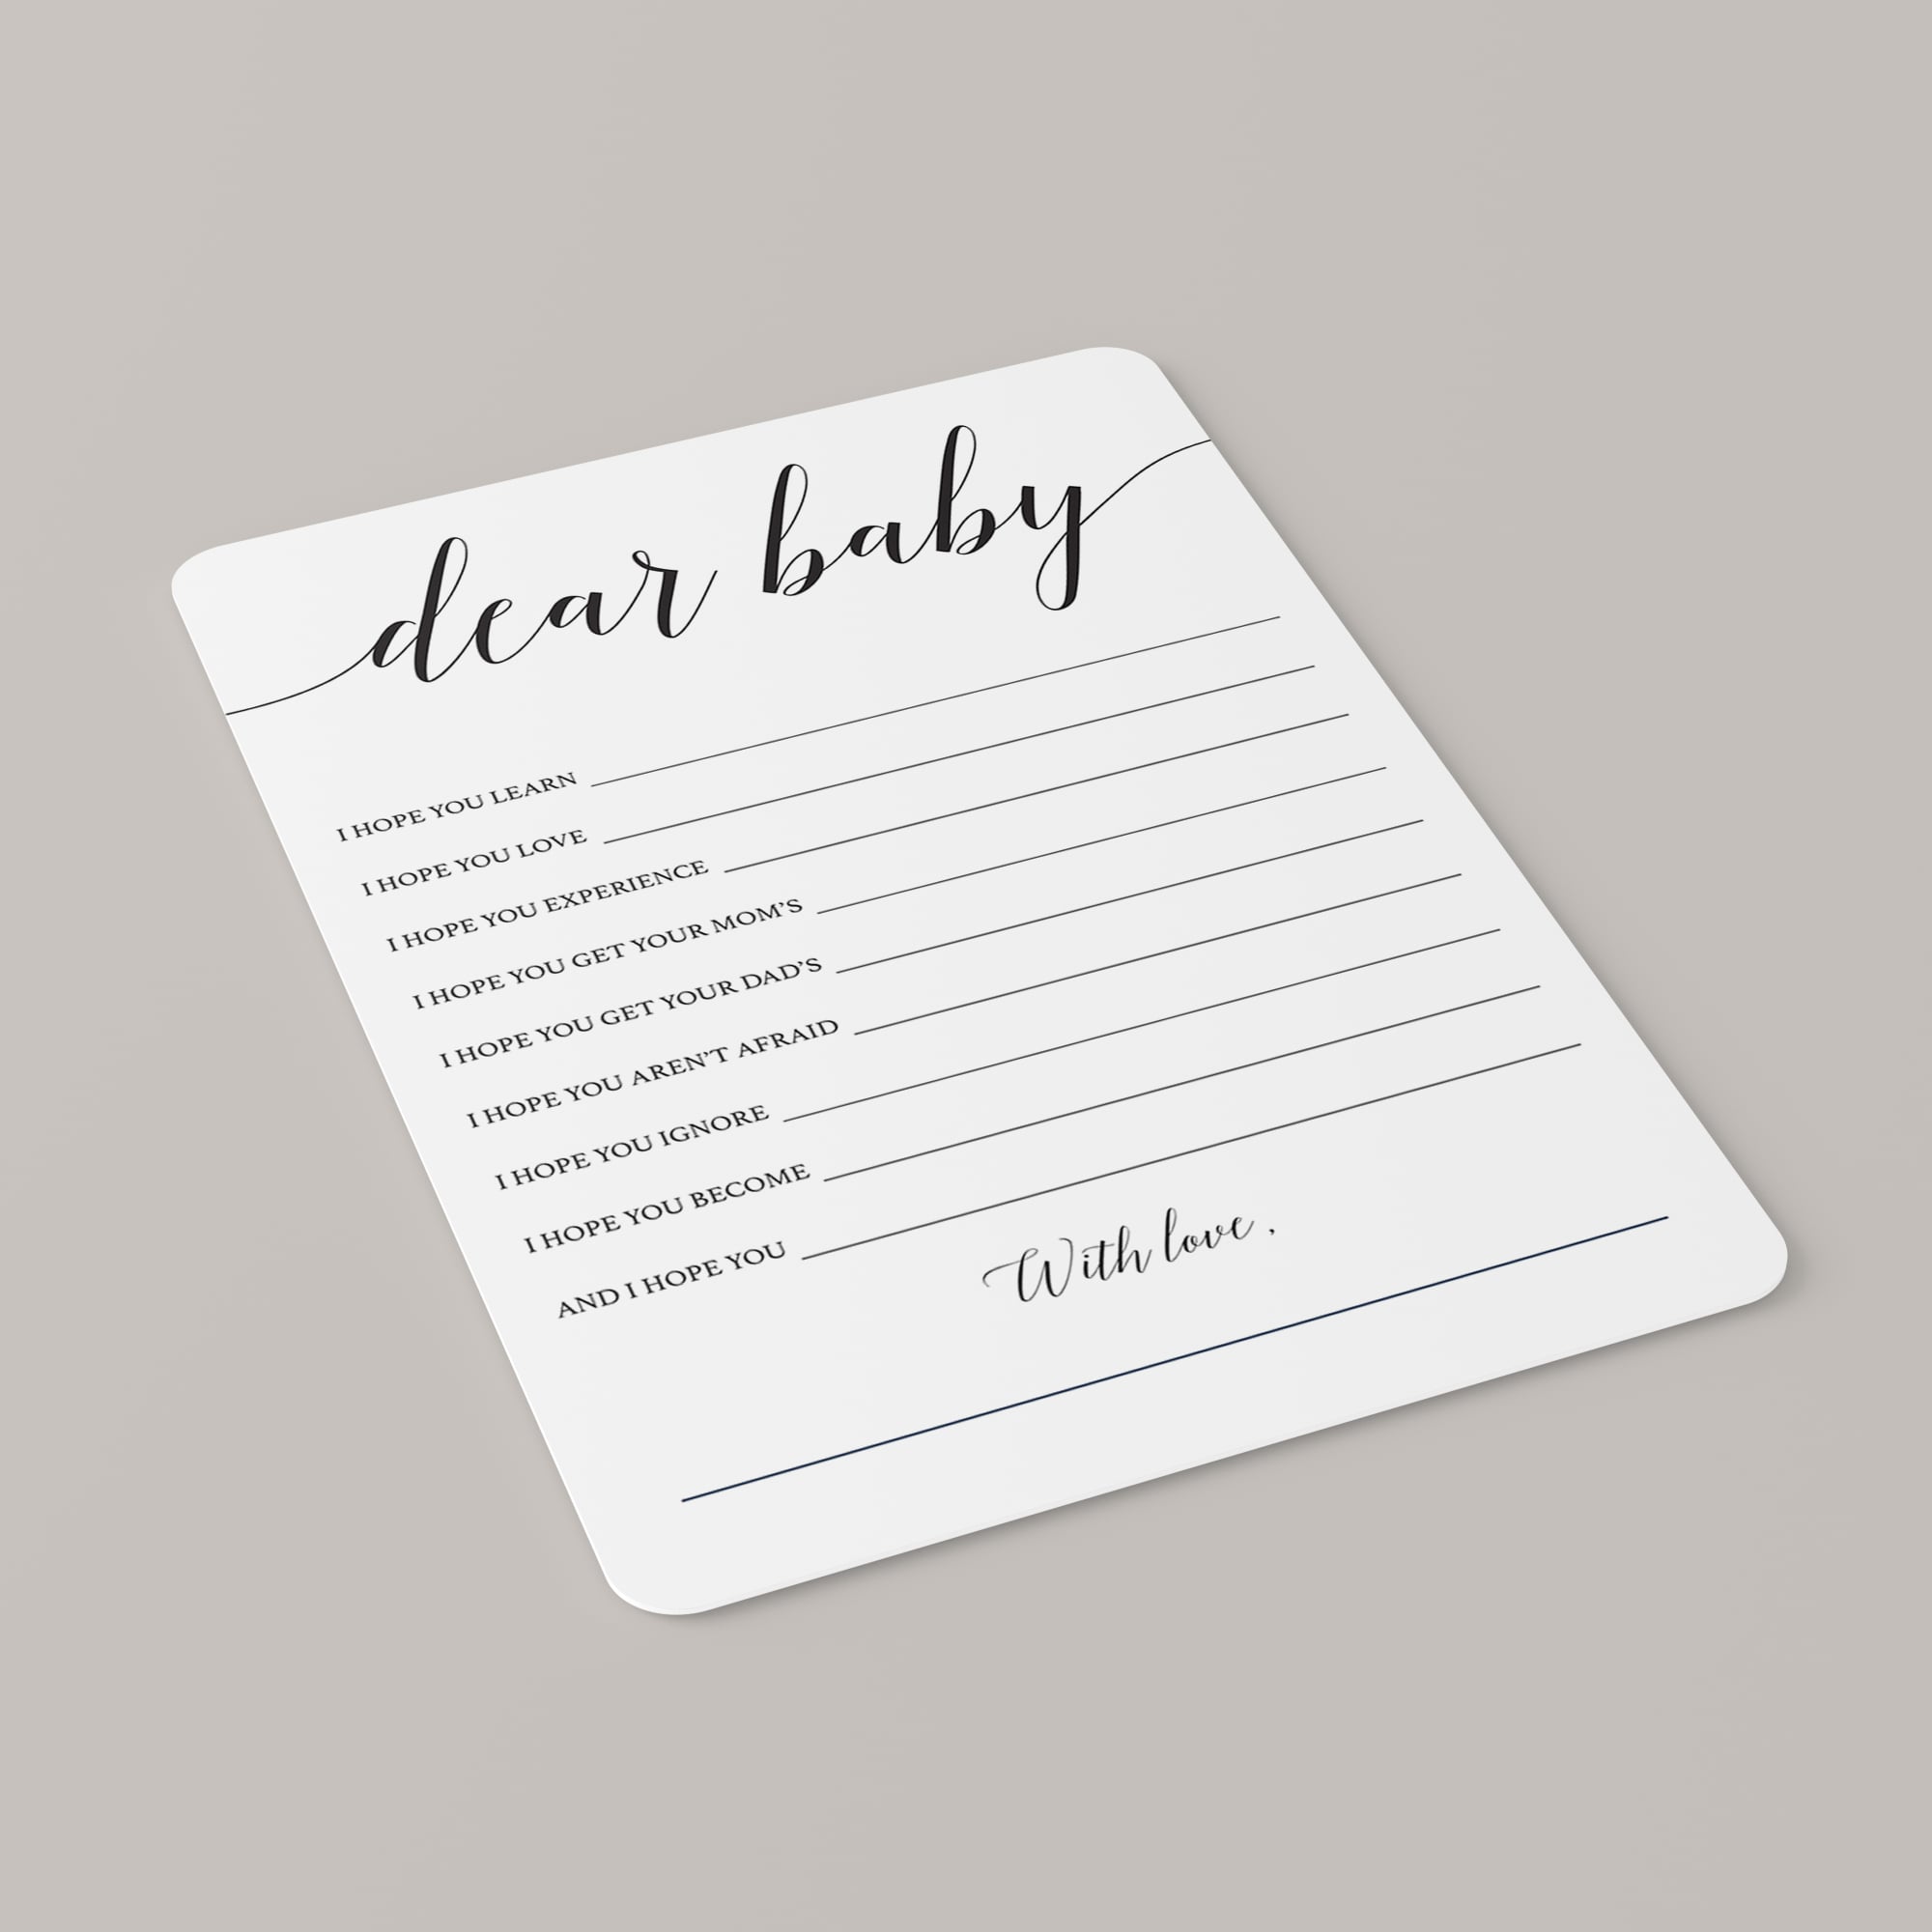 Baby wishes cards calligraphy font by LittleSizzle